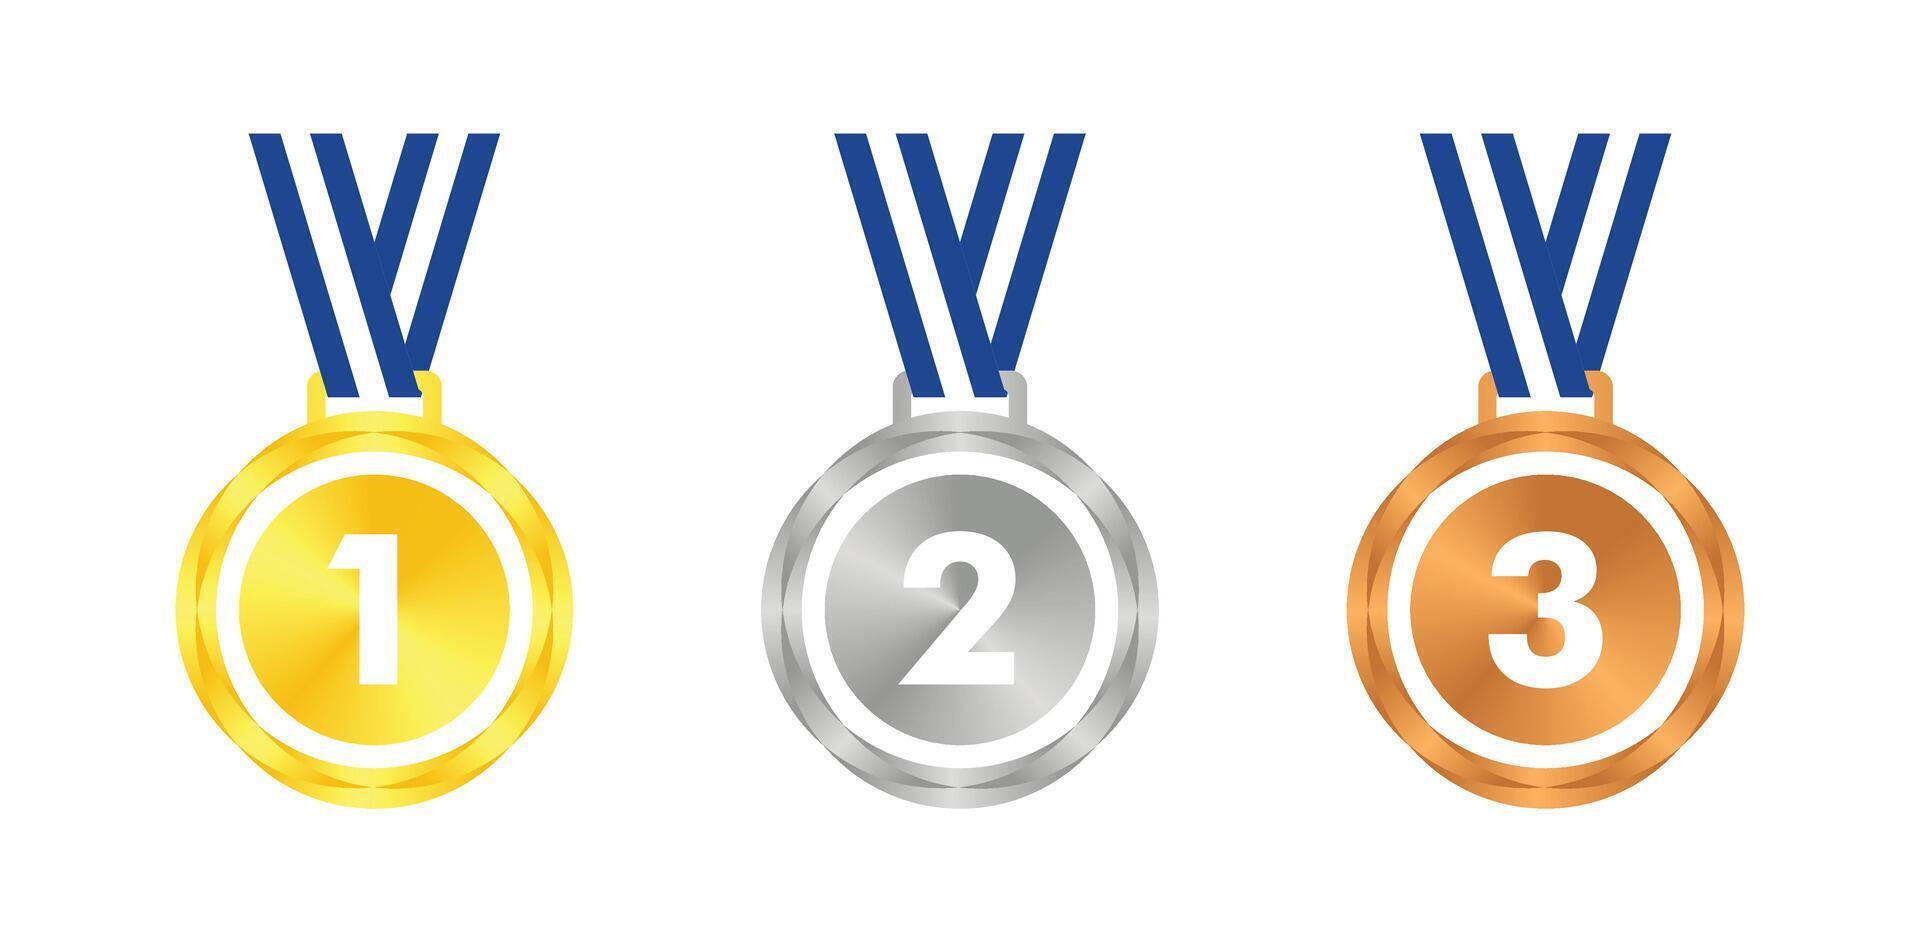 Winner Gold, Silver, Bronze. 1st 2nd 3rd medal first place second third Placement Achievement award winner badge guarantee winning prize ribbon symbol sign icon logo template vector